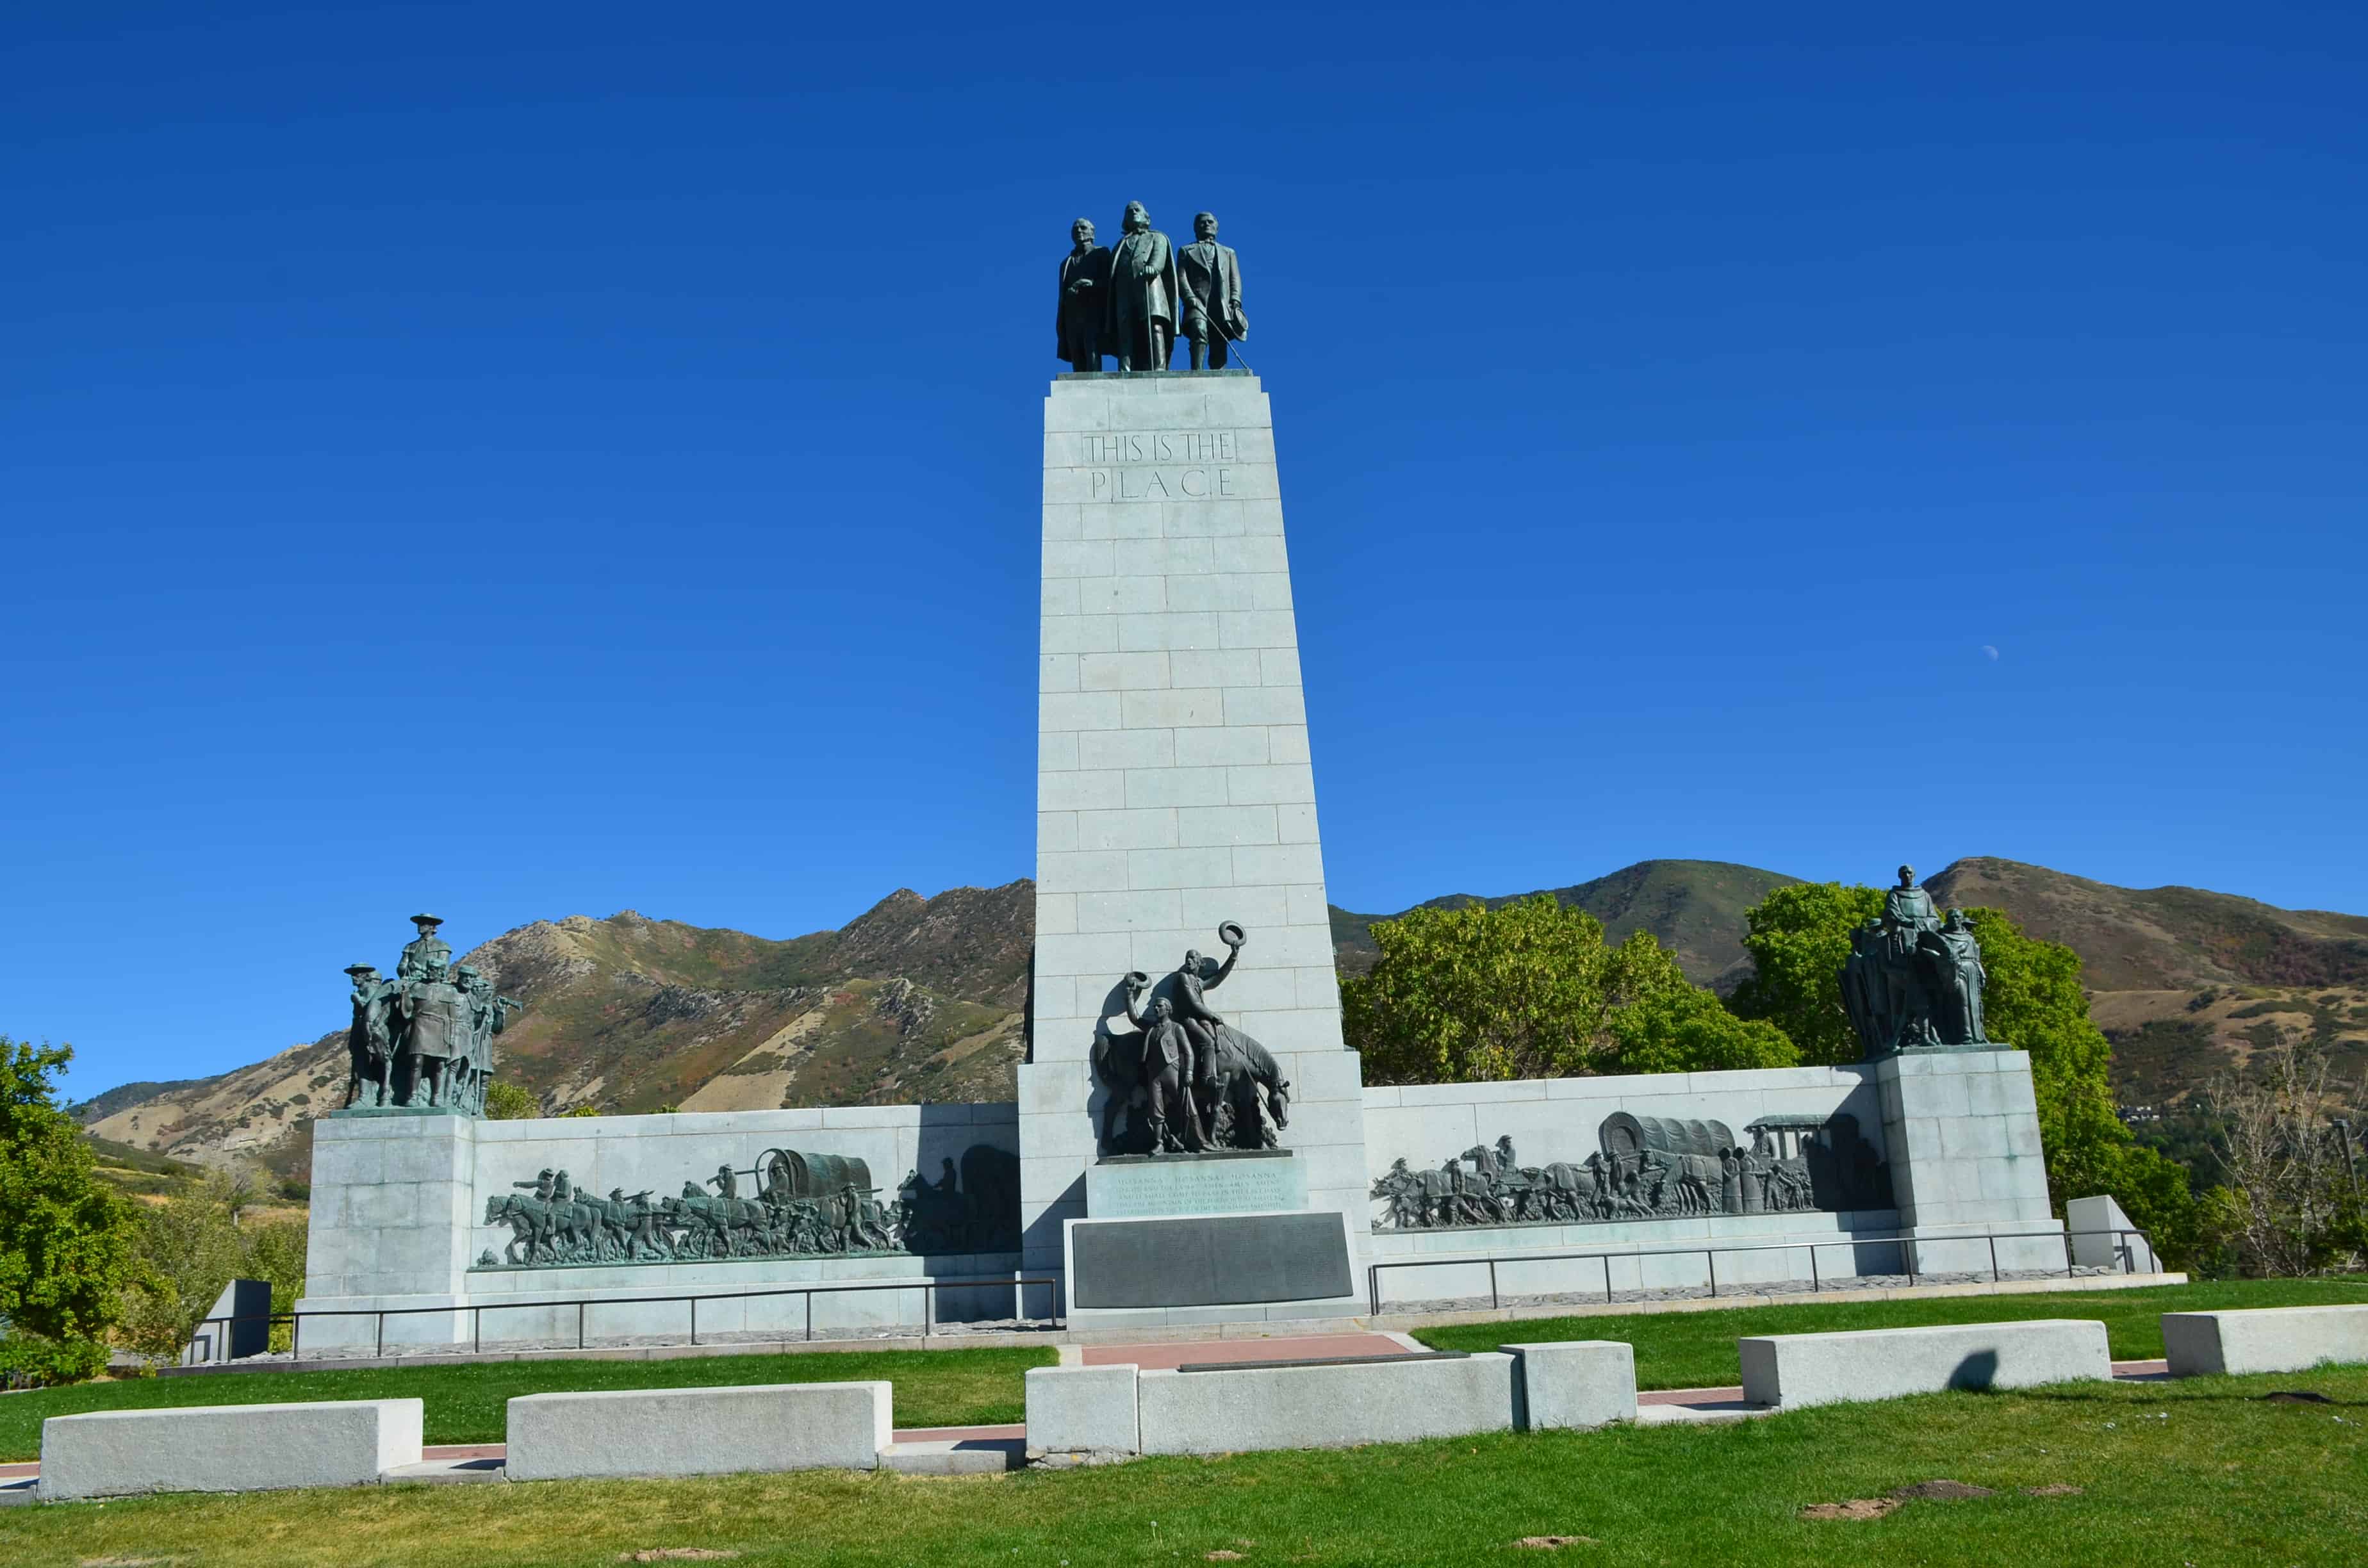 This Is the Place Monument in Salt Lake City, Utah